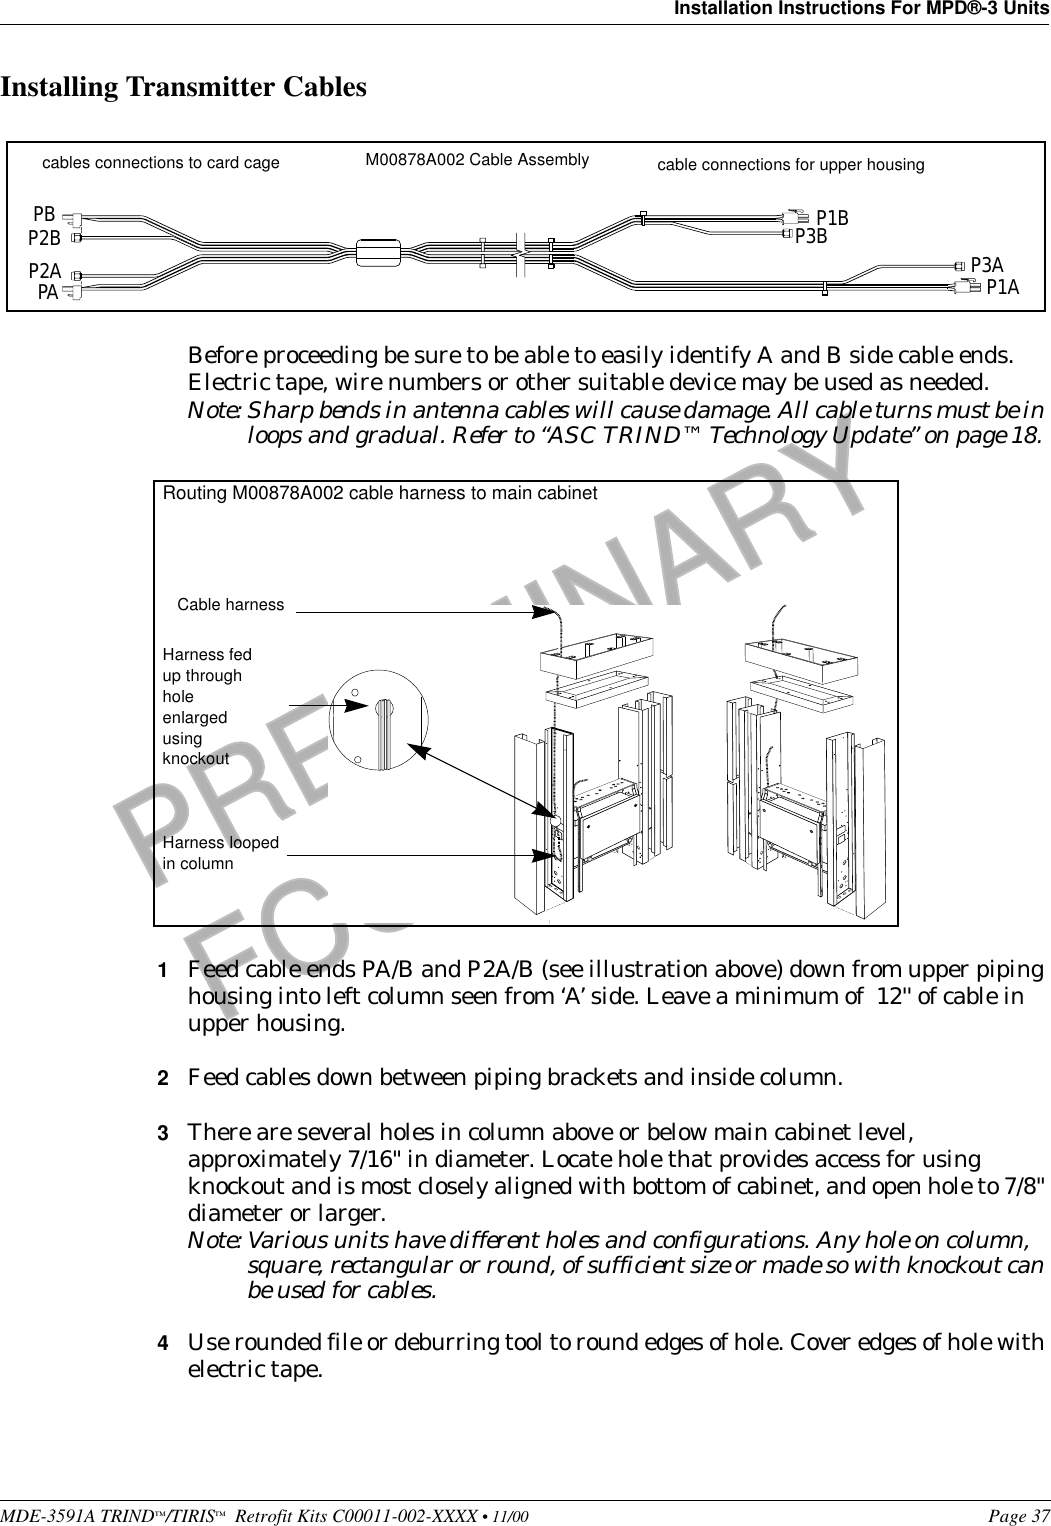 MDE-3591A TRIND™/TIRIS™  Retrofit Kits C00011-002-XXXX • 11/00 Page 37Installation Instructions For MPD®-3 UnitsPRELIMINARYFCC 11/30Installing Transmitter CablesBefore proceeding be sure to be able to easily identify A and B side cable ends. Electric tape, wire numbers or other suitable device may be used as needed.Note: Sharp bends in antenna cables will cause damage. All cable turns must be in loops and gradual. Refer to “ASC TRIND™ Technology Update” on page 18. 1Feed cable ends PA/B and P2A/B (see illustration above) down from upper piping housing into left column seen from ‘A’ side. Leave a minimum of  12&apos;&apos; of cable in upper housing.2Feed cables down between piping brackets and inside column.3There are several holes in column above or below main cabinet level, approximately 7/16&quot; in diameter. Locate hole that provides access for using knockout and is most closely aligned with bottom of cabinet, and open hole to 7/8&quot; diameter or larger.Note: Various units have different holes and configurations. Any hole on column, square, rectangular or round, of sufficient size or made so with knockout can be used for cables.4Use rounded file or deburring tool to round edges of hole. Cover edges of hole with electric tape.M00878A002 Cable Assemblycables connections to card cage  cable connections for upper housingPBP2BP2APAP1BP3B P3AP1ACable harnessHarness looped in columnRouting M00878A002 cable harness to main cabinetHarness fed up through hole enlarged using knockout 